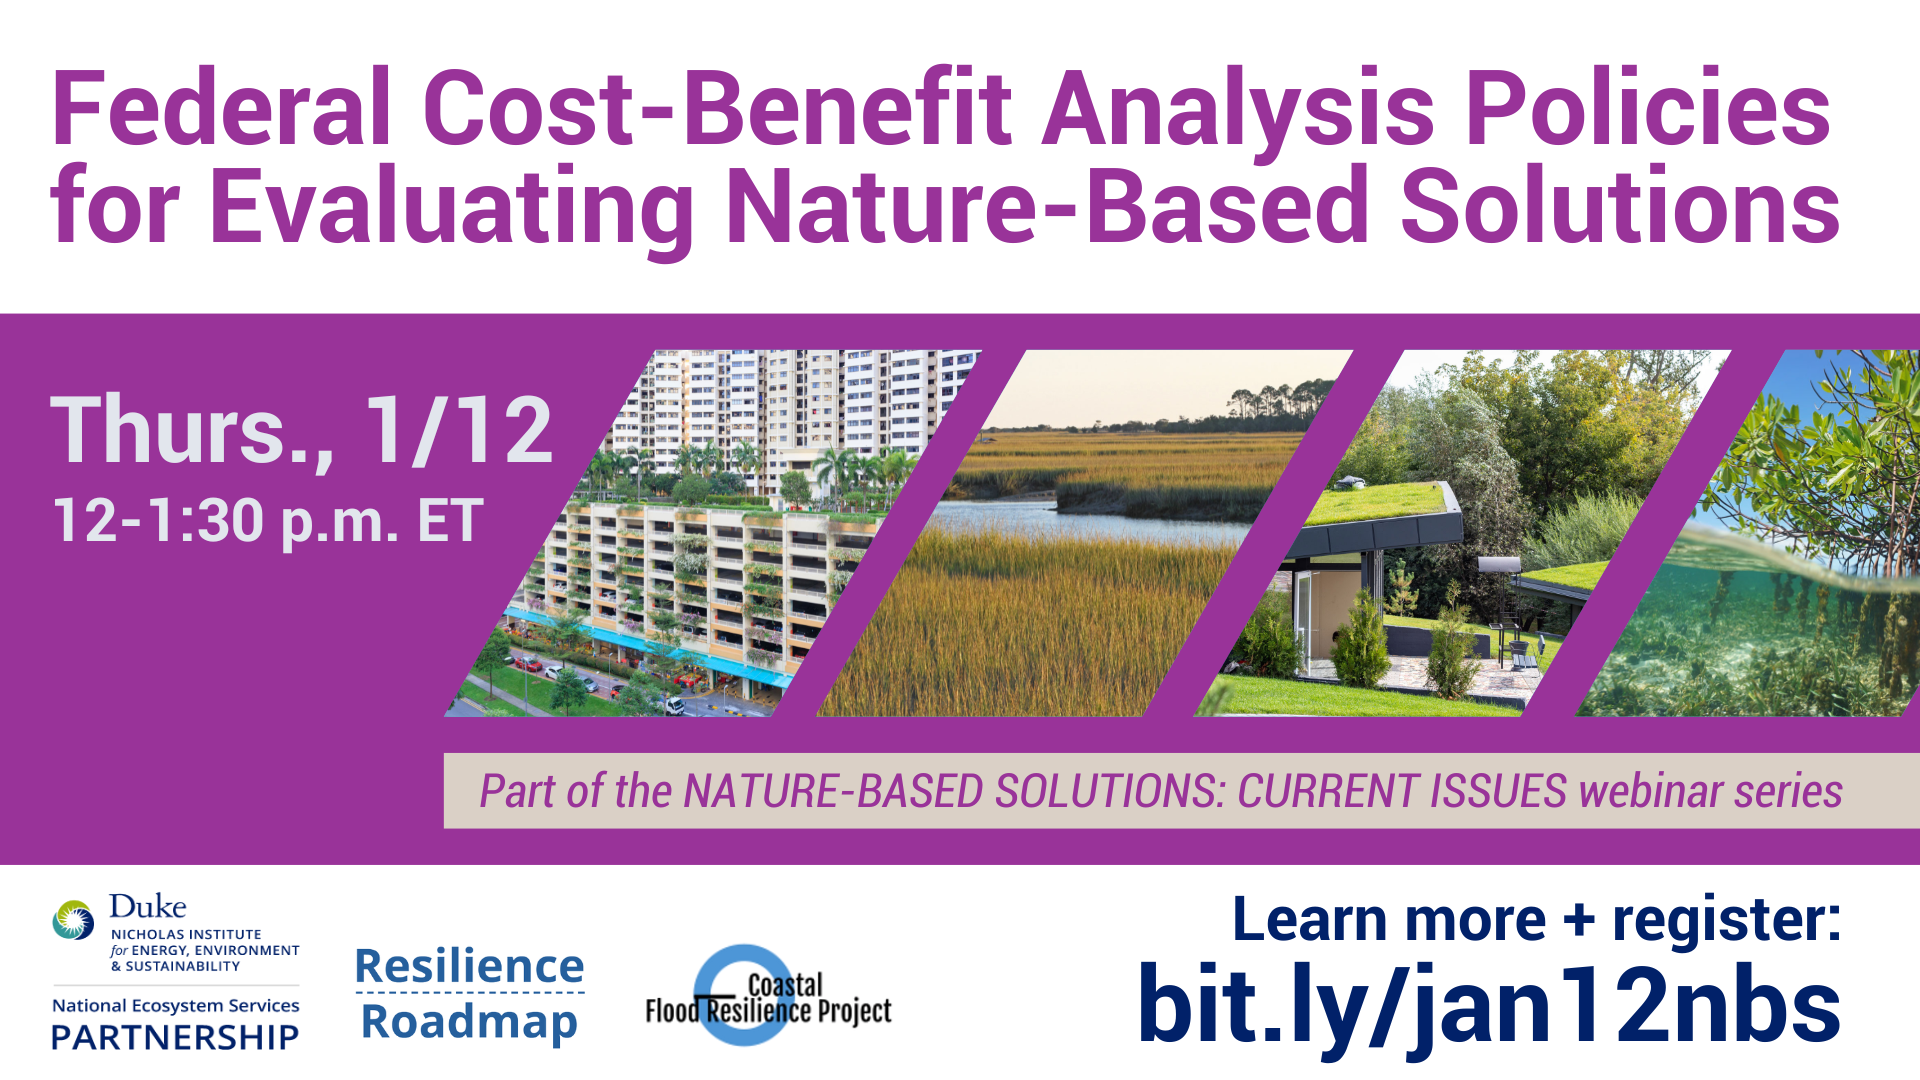 Quantifying co-benefits and disbenefits of Nature-based Solutions